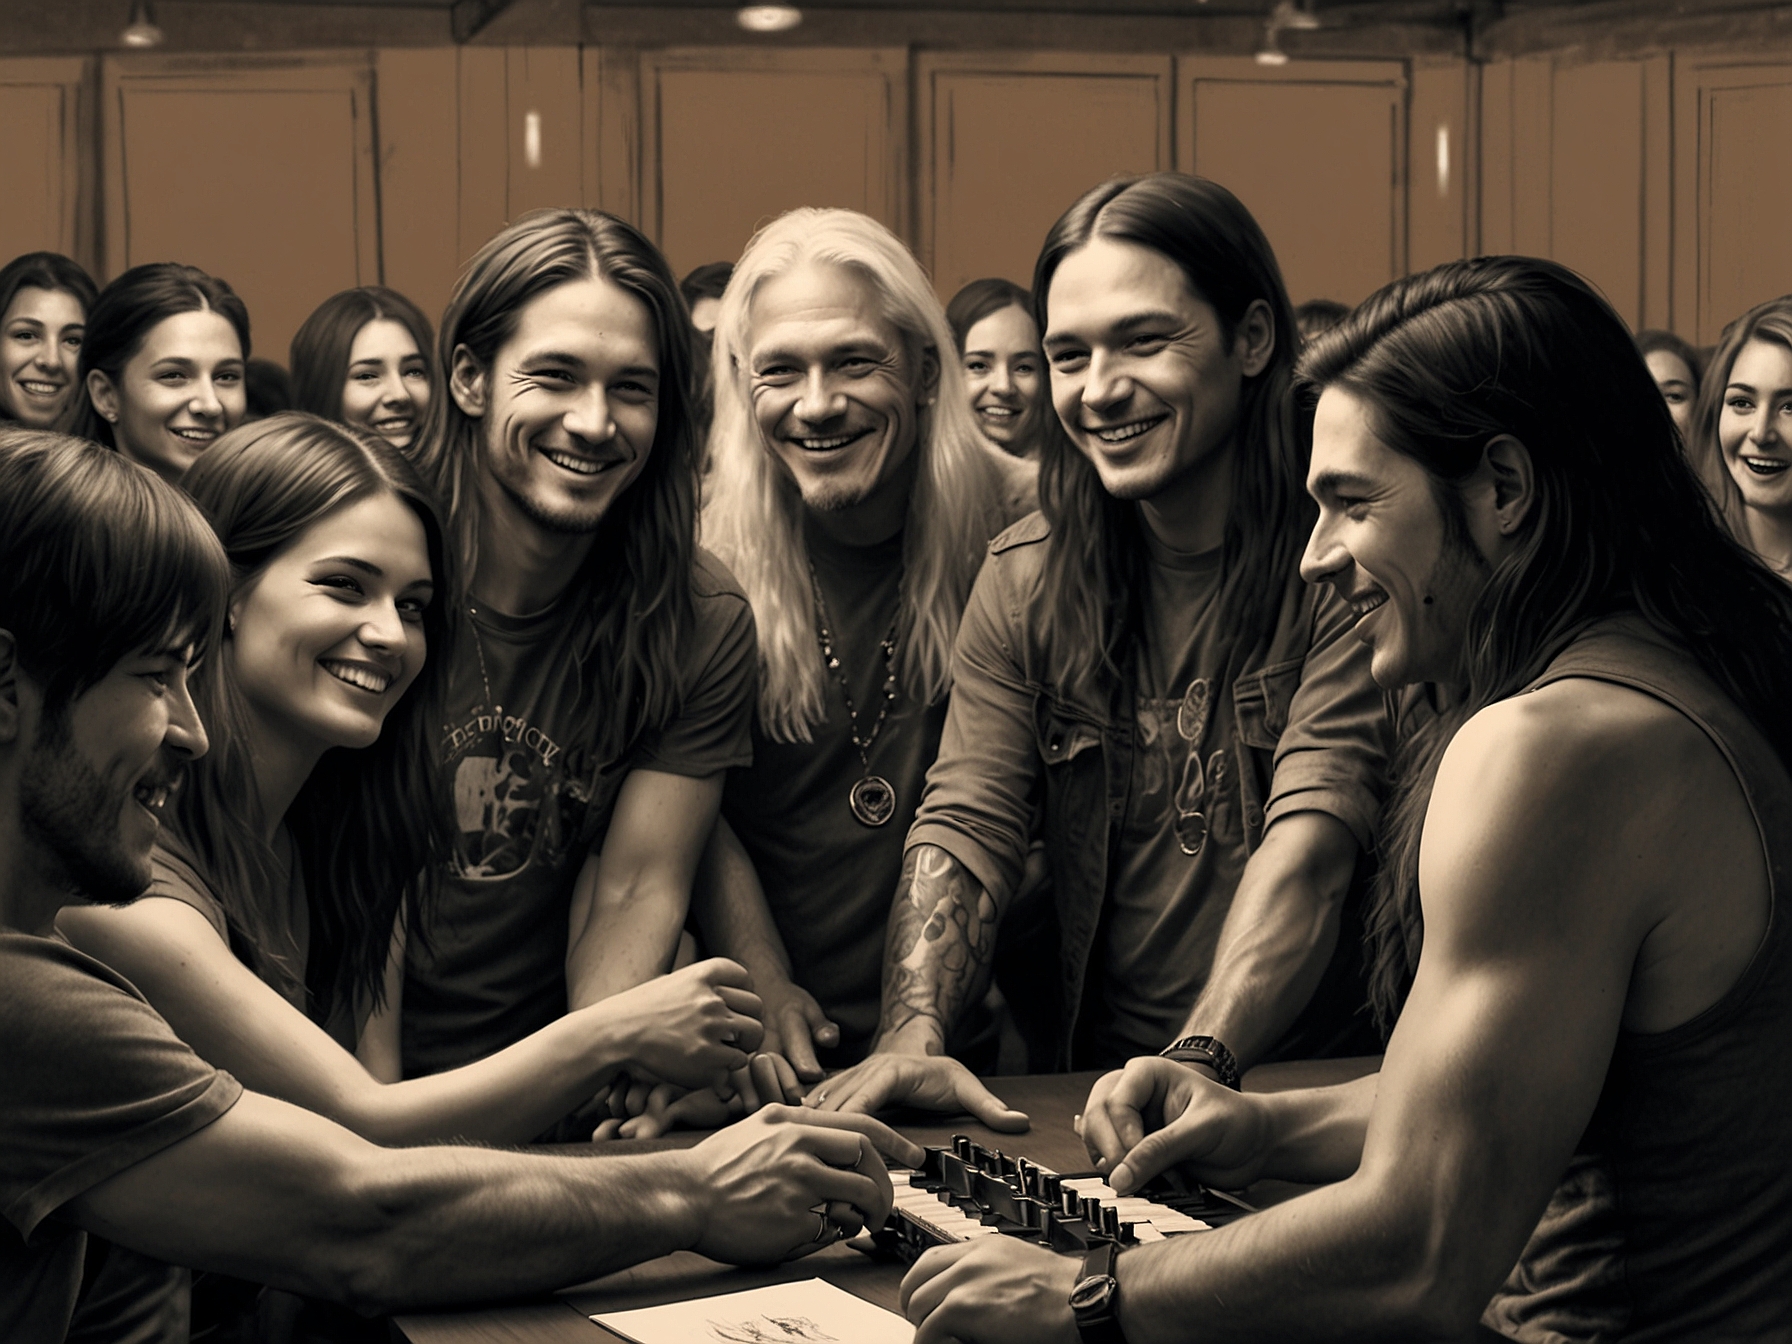 Band members of Crazy Horse interacting with fans during a meet-and-greet session, showcasing the strong bond and mutual support between the artists and their fanbase.